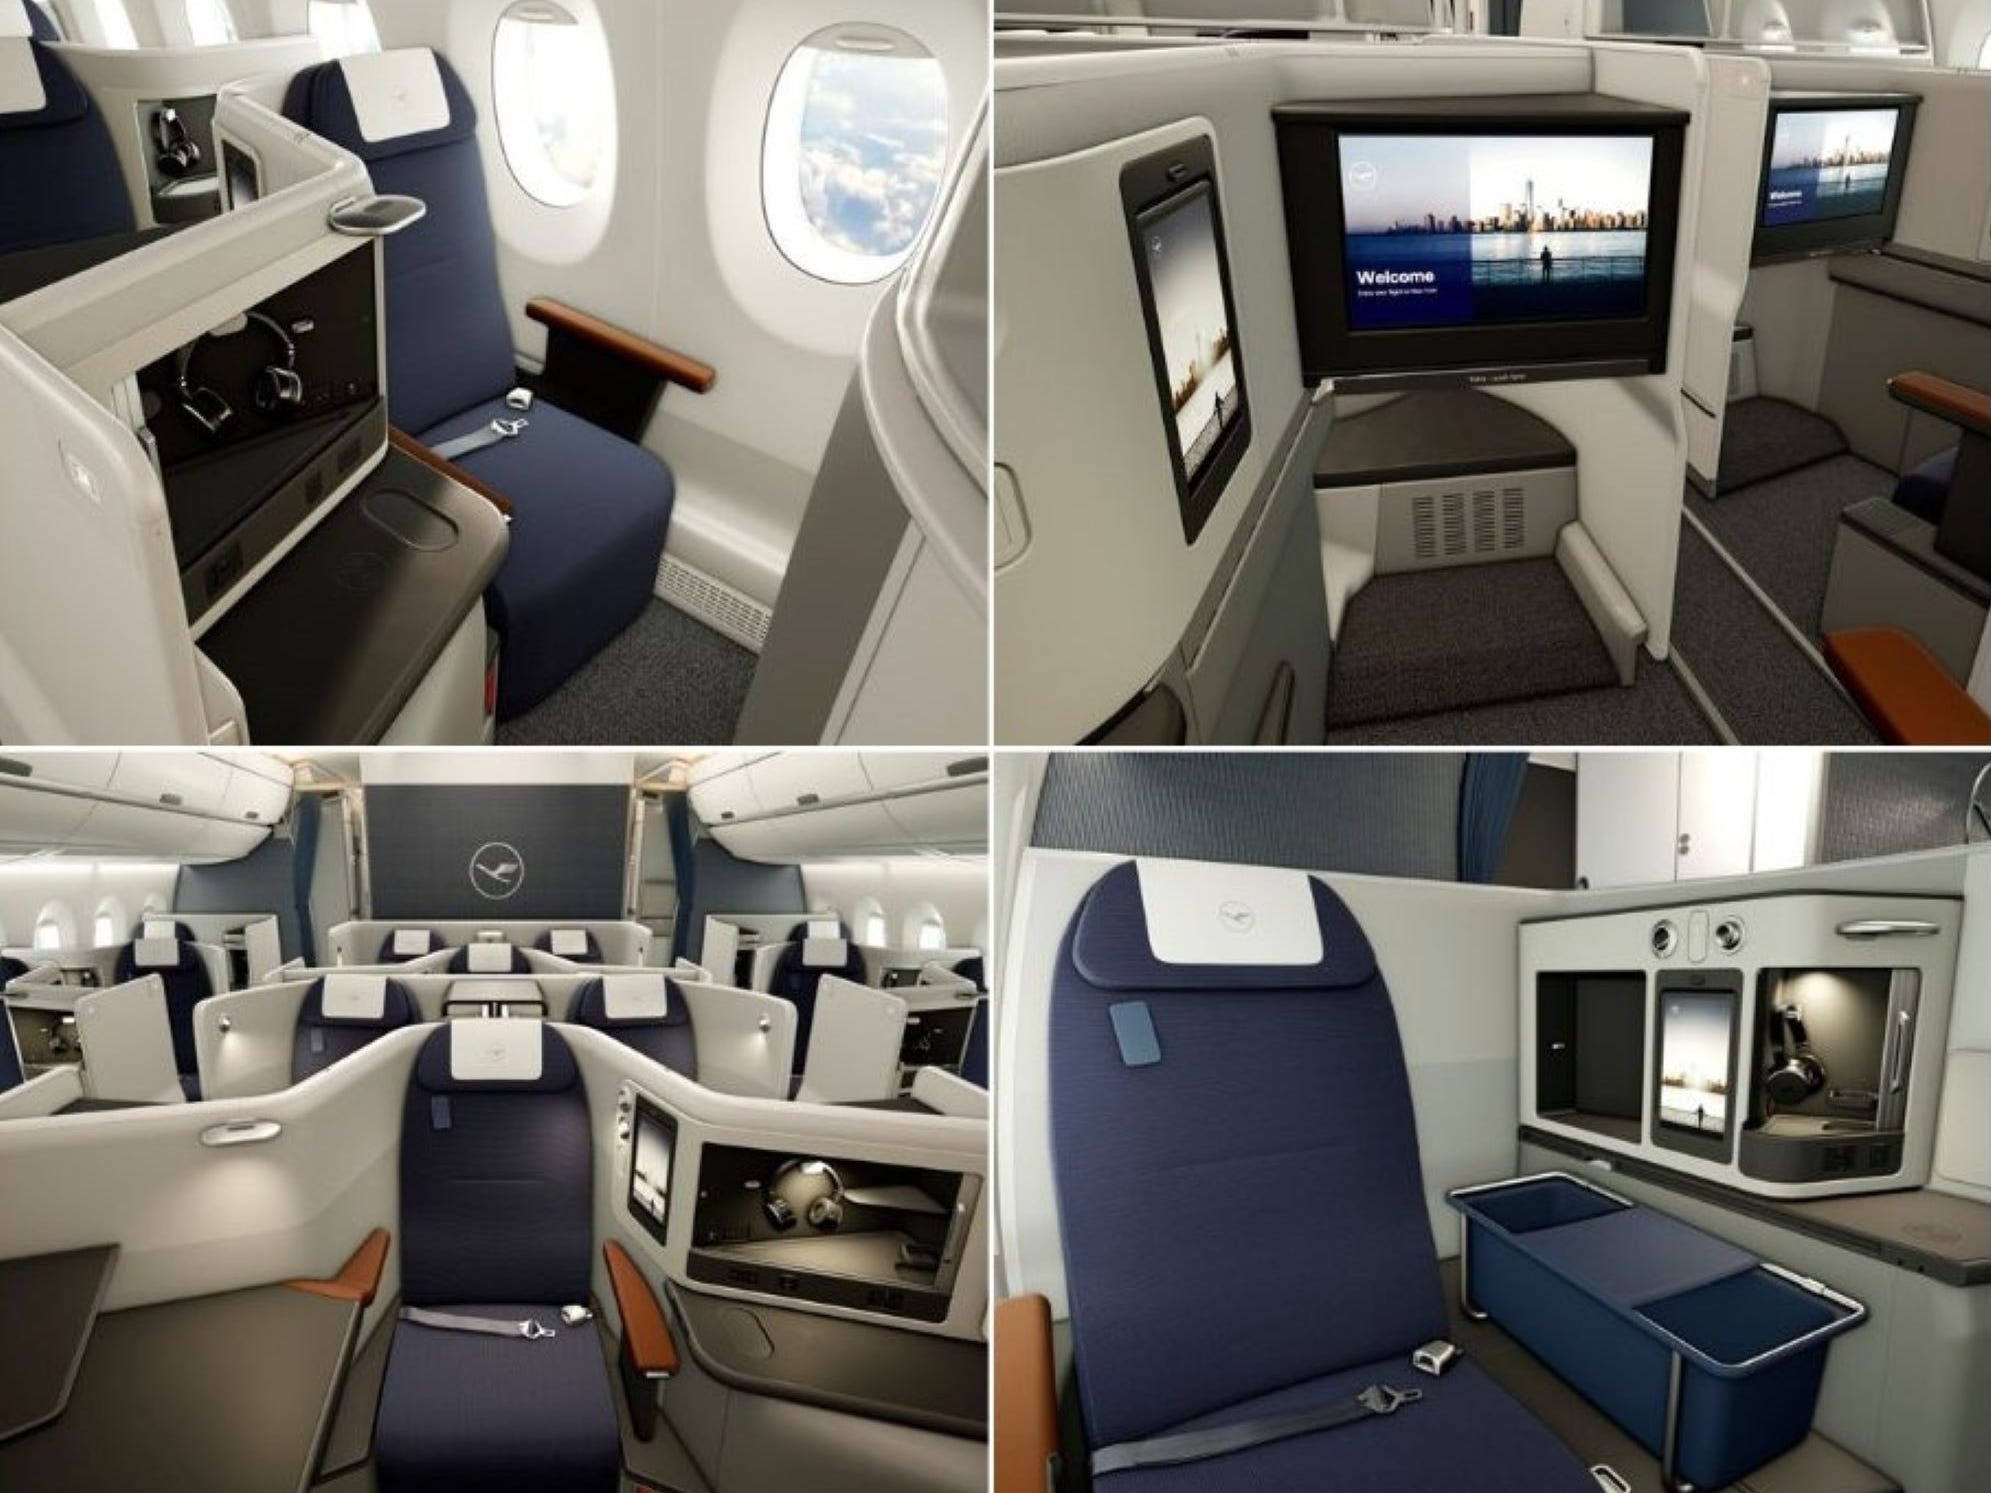 <p>These include single and double suites in the first row, seats with extra work surfaces, high-privacy window seats with or without a baby bassinet, seats with extra-long beds, and a double berth in the last row.</p><p> The first-row suites are the only business class options with a door.</p>